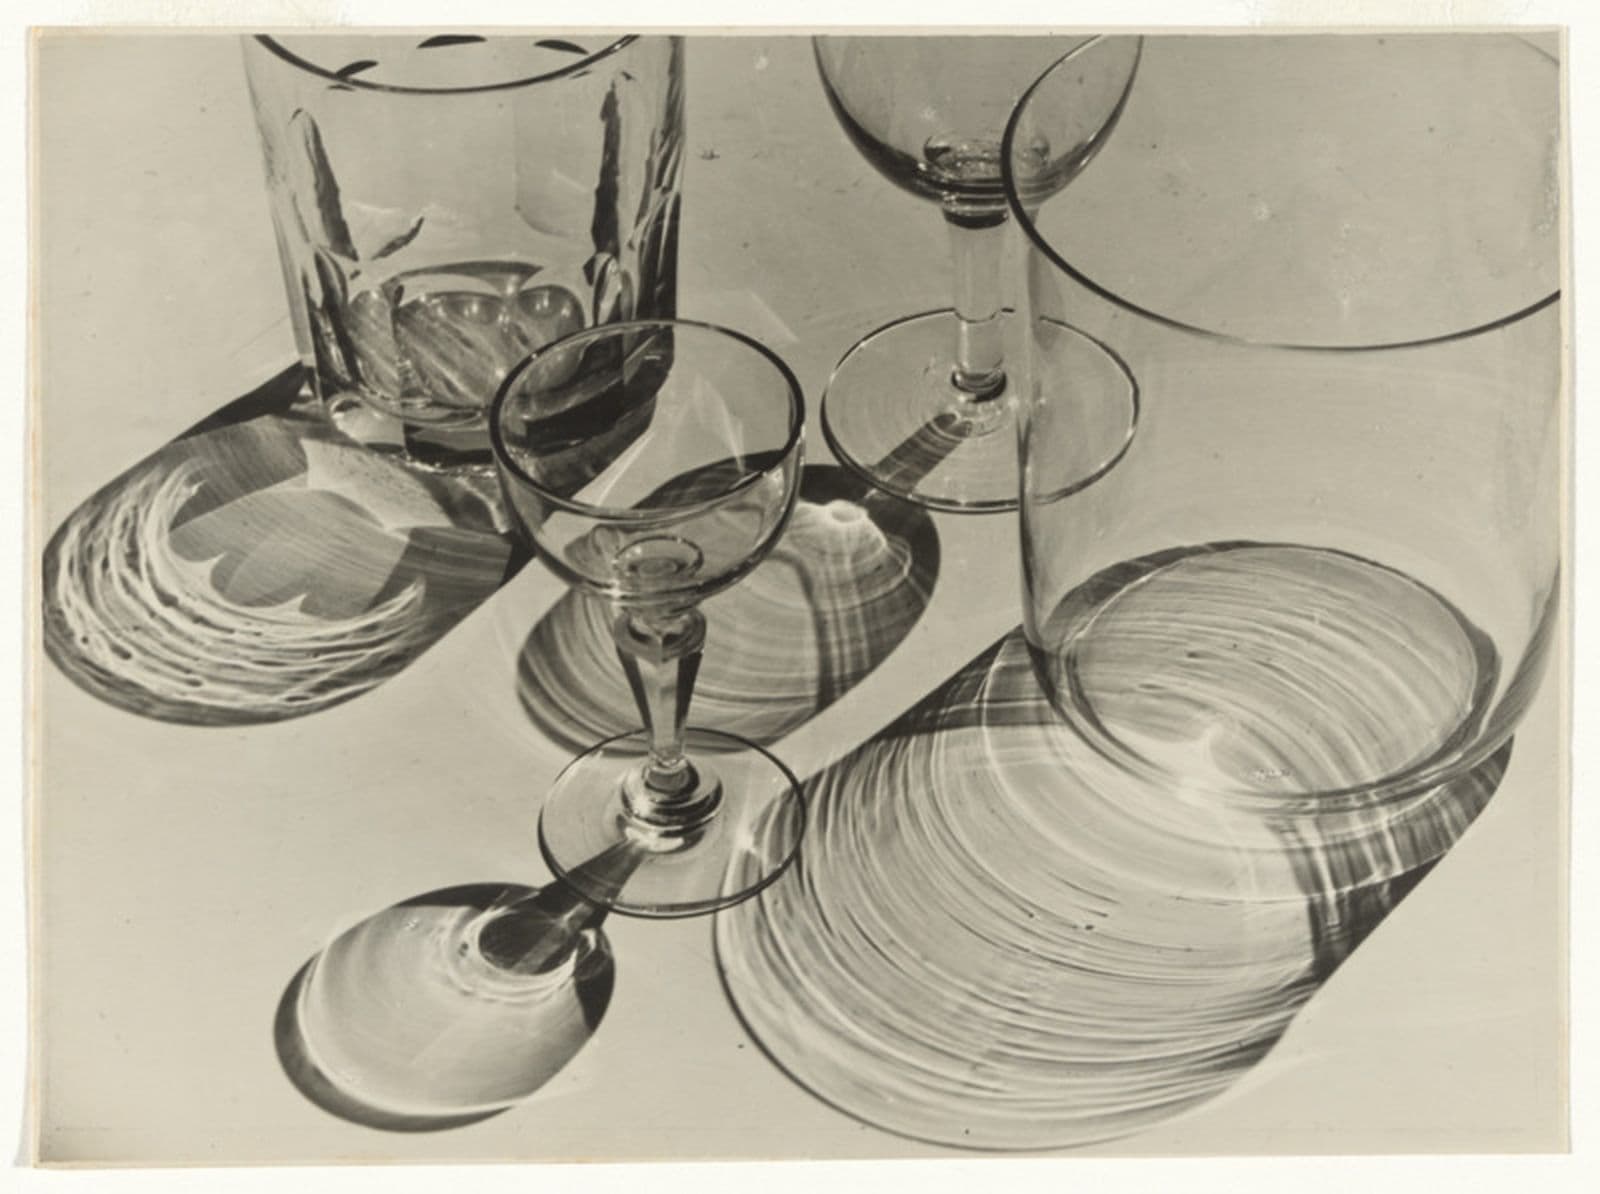 Black and white photograph of drinking glasses of different shapes and sizes casting shadows on the table